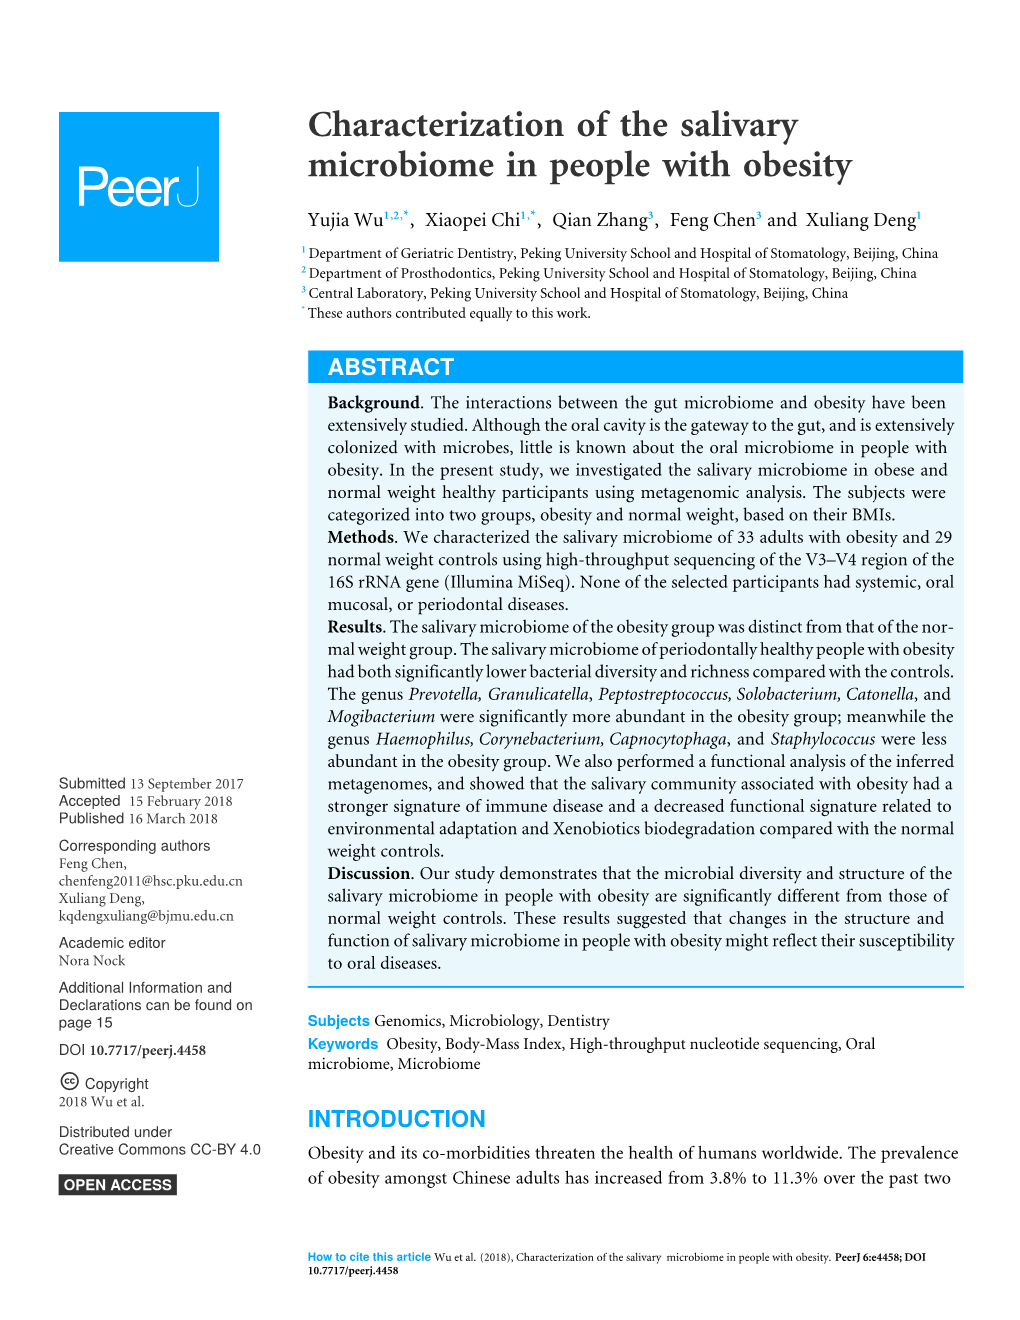 Characterization of the Salivary Microbiome in People with Obesity